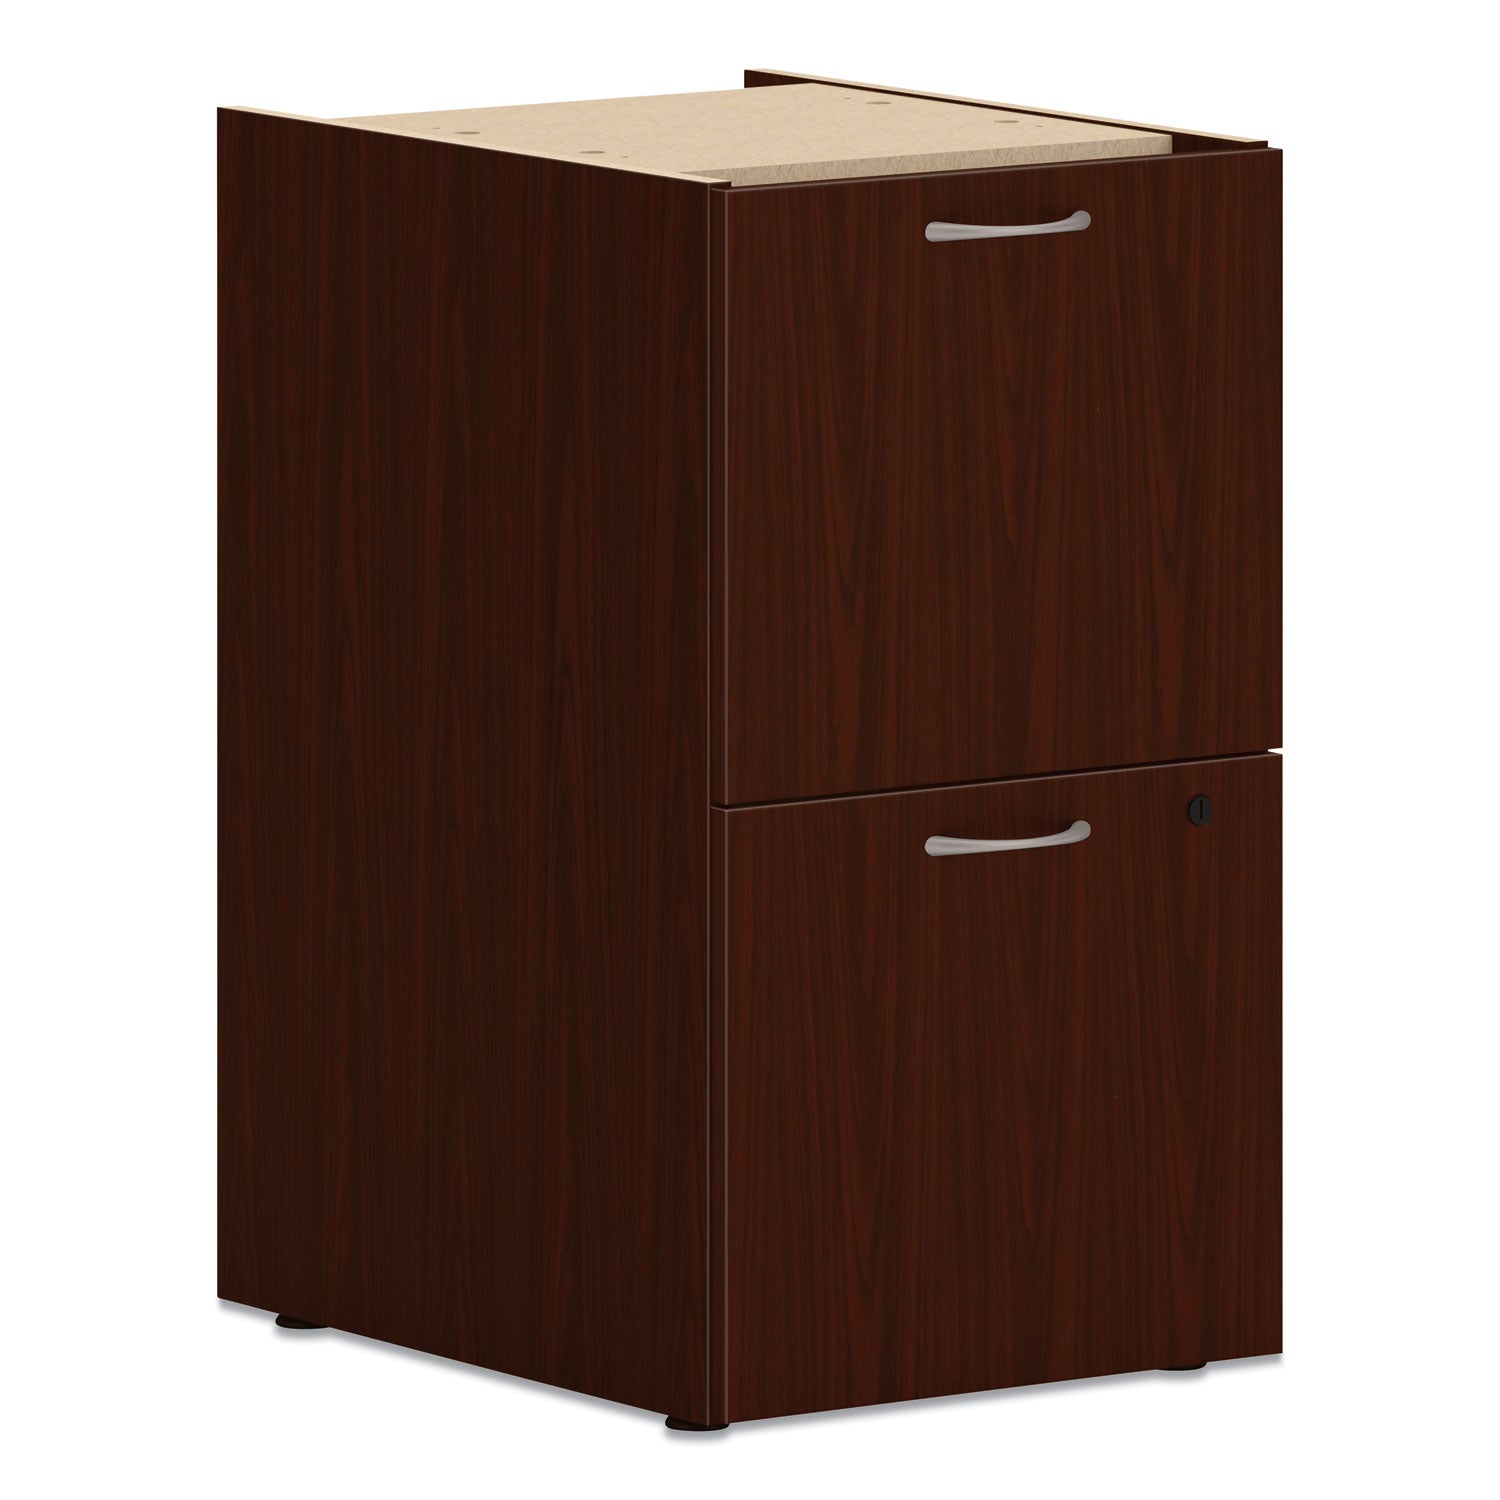 mod-support-pedestal-left-or-right-2-legal-letter-size-file-drawers-traditional-mahogany-15-x-20-x-28_honplpsfflt1 - 1